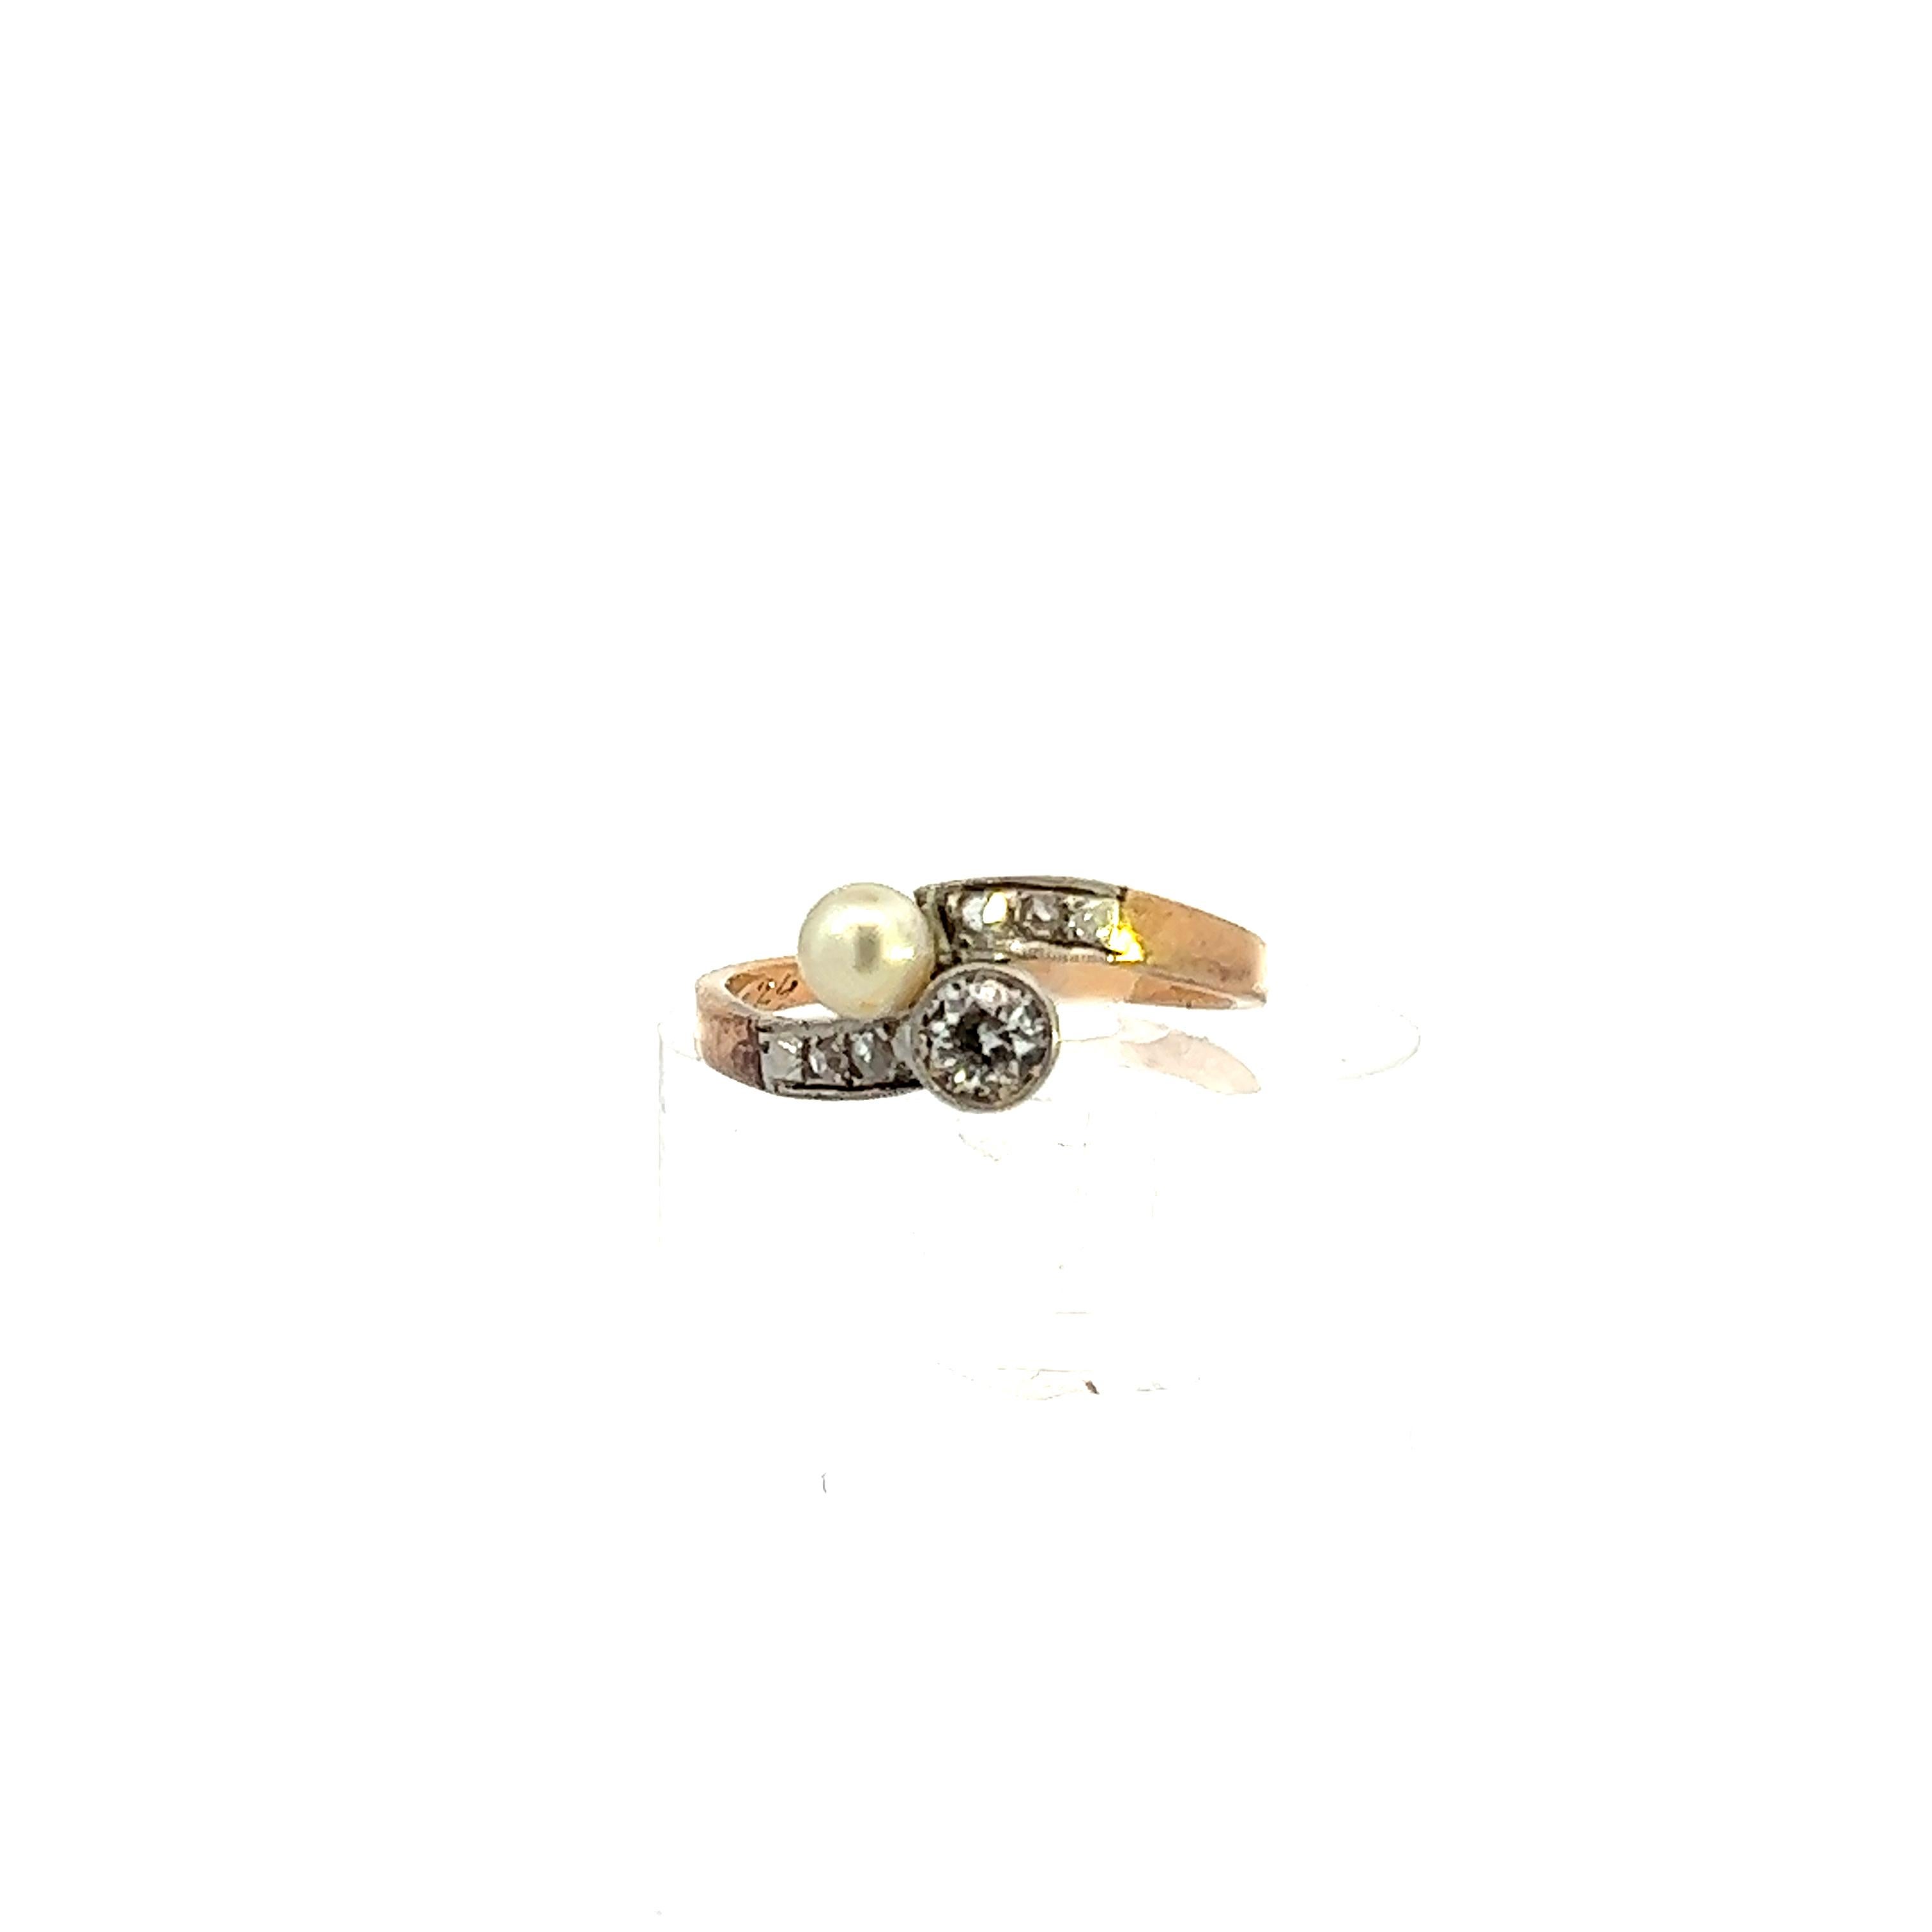 1925 Art Deco Platinum Diamond & Pearl Bypass Ring - Platinum Over Gold  For Sale 3